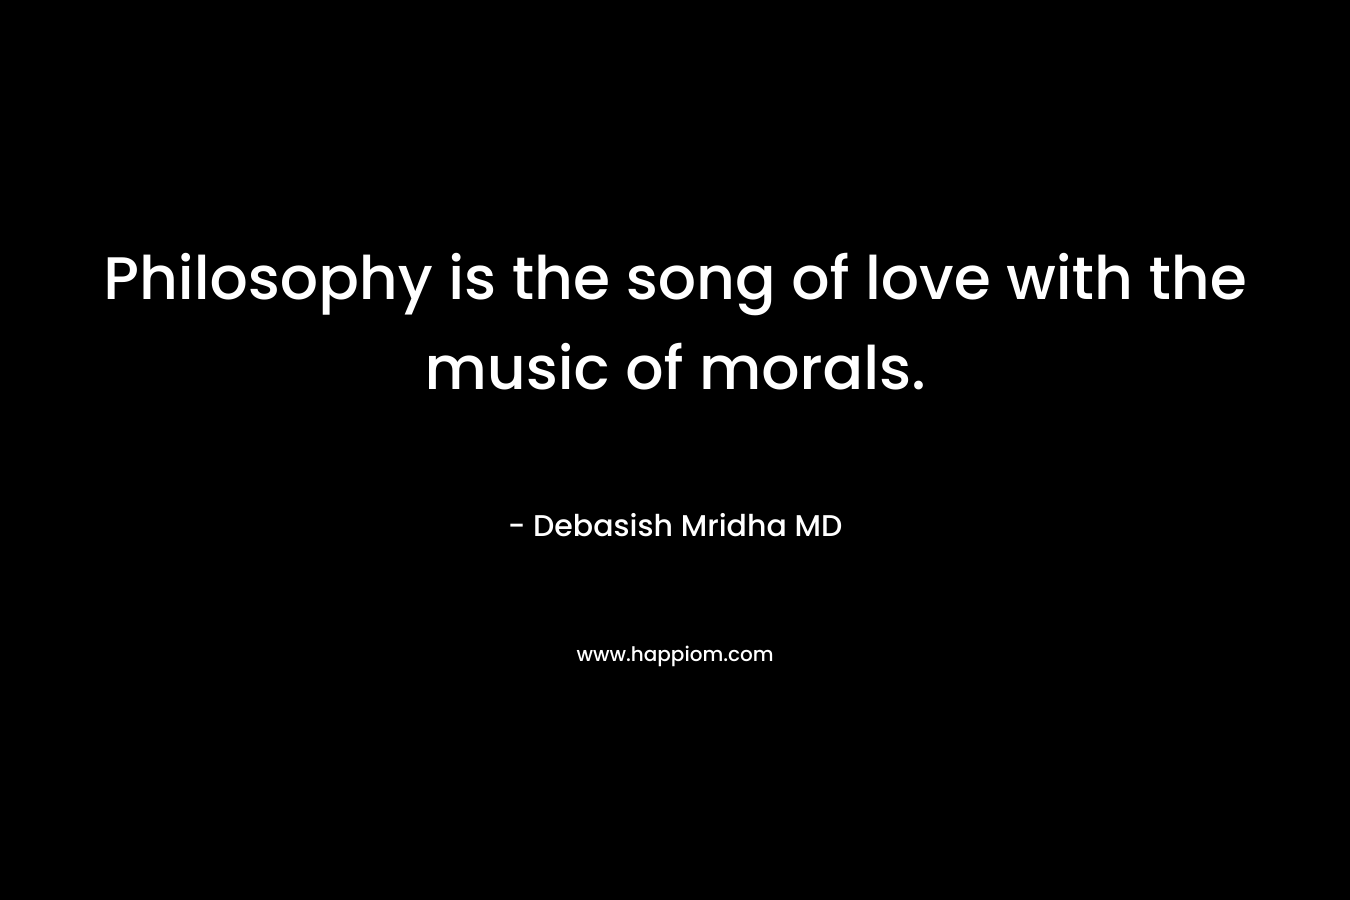 Philosophy is the song of love with the music of morals.